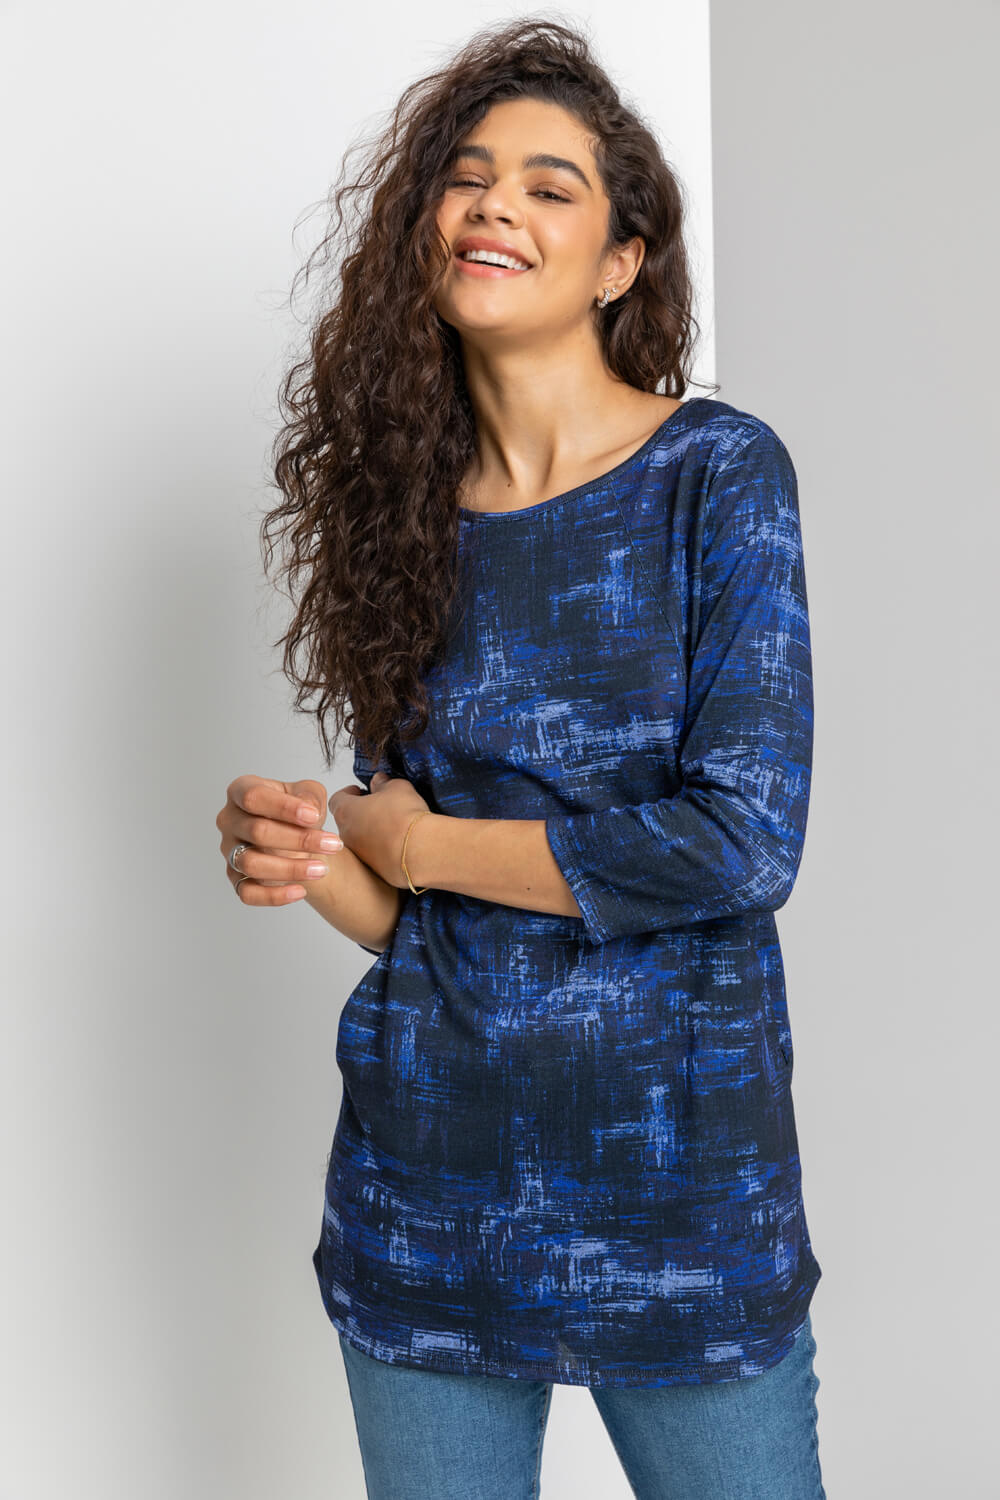 Midnight Blue Abstract Print Pocket Tunic Top, Image 5 of 5